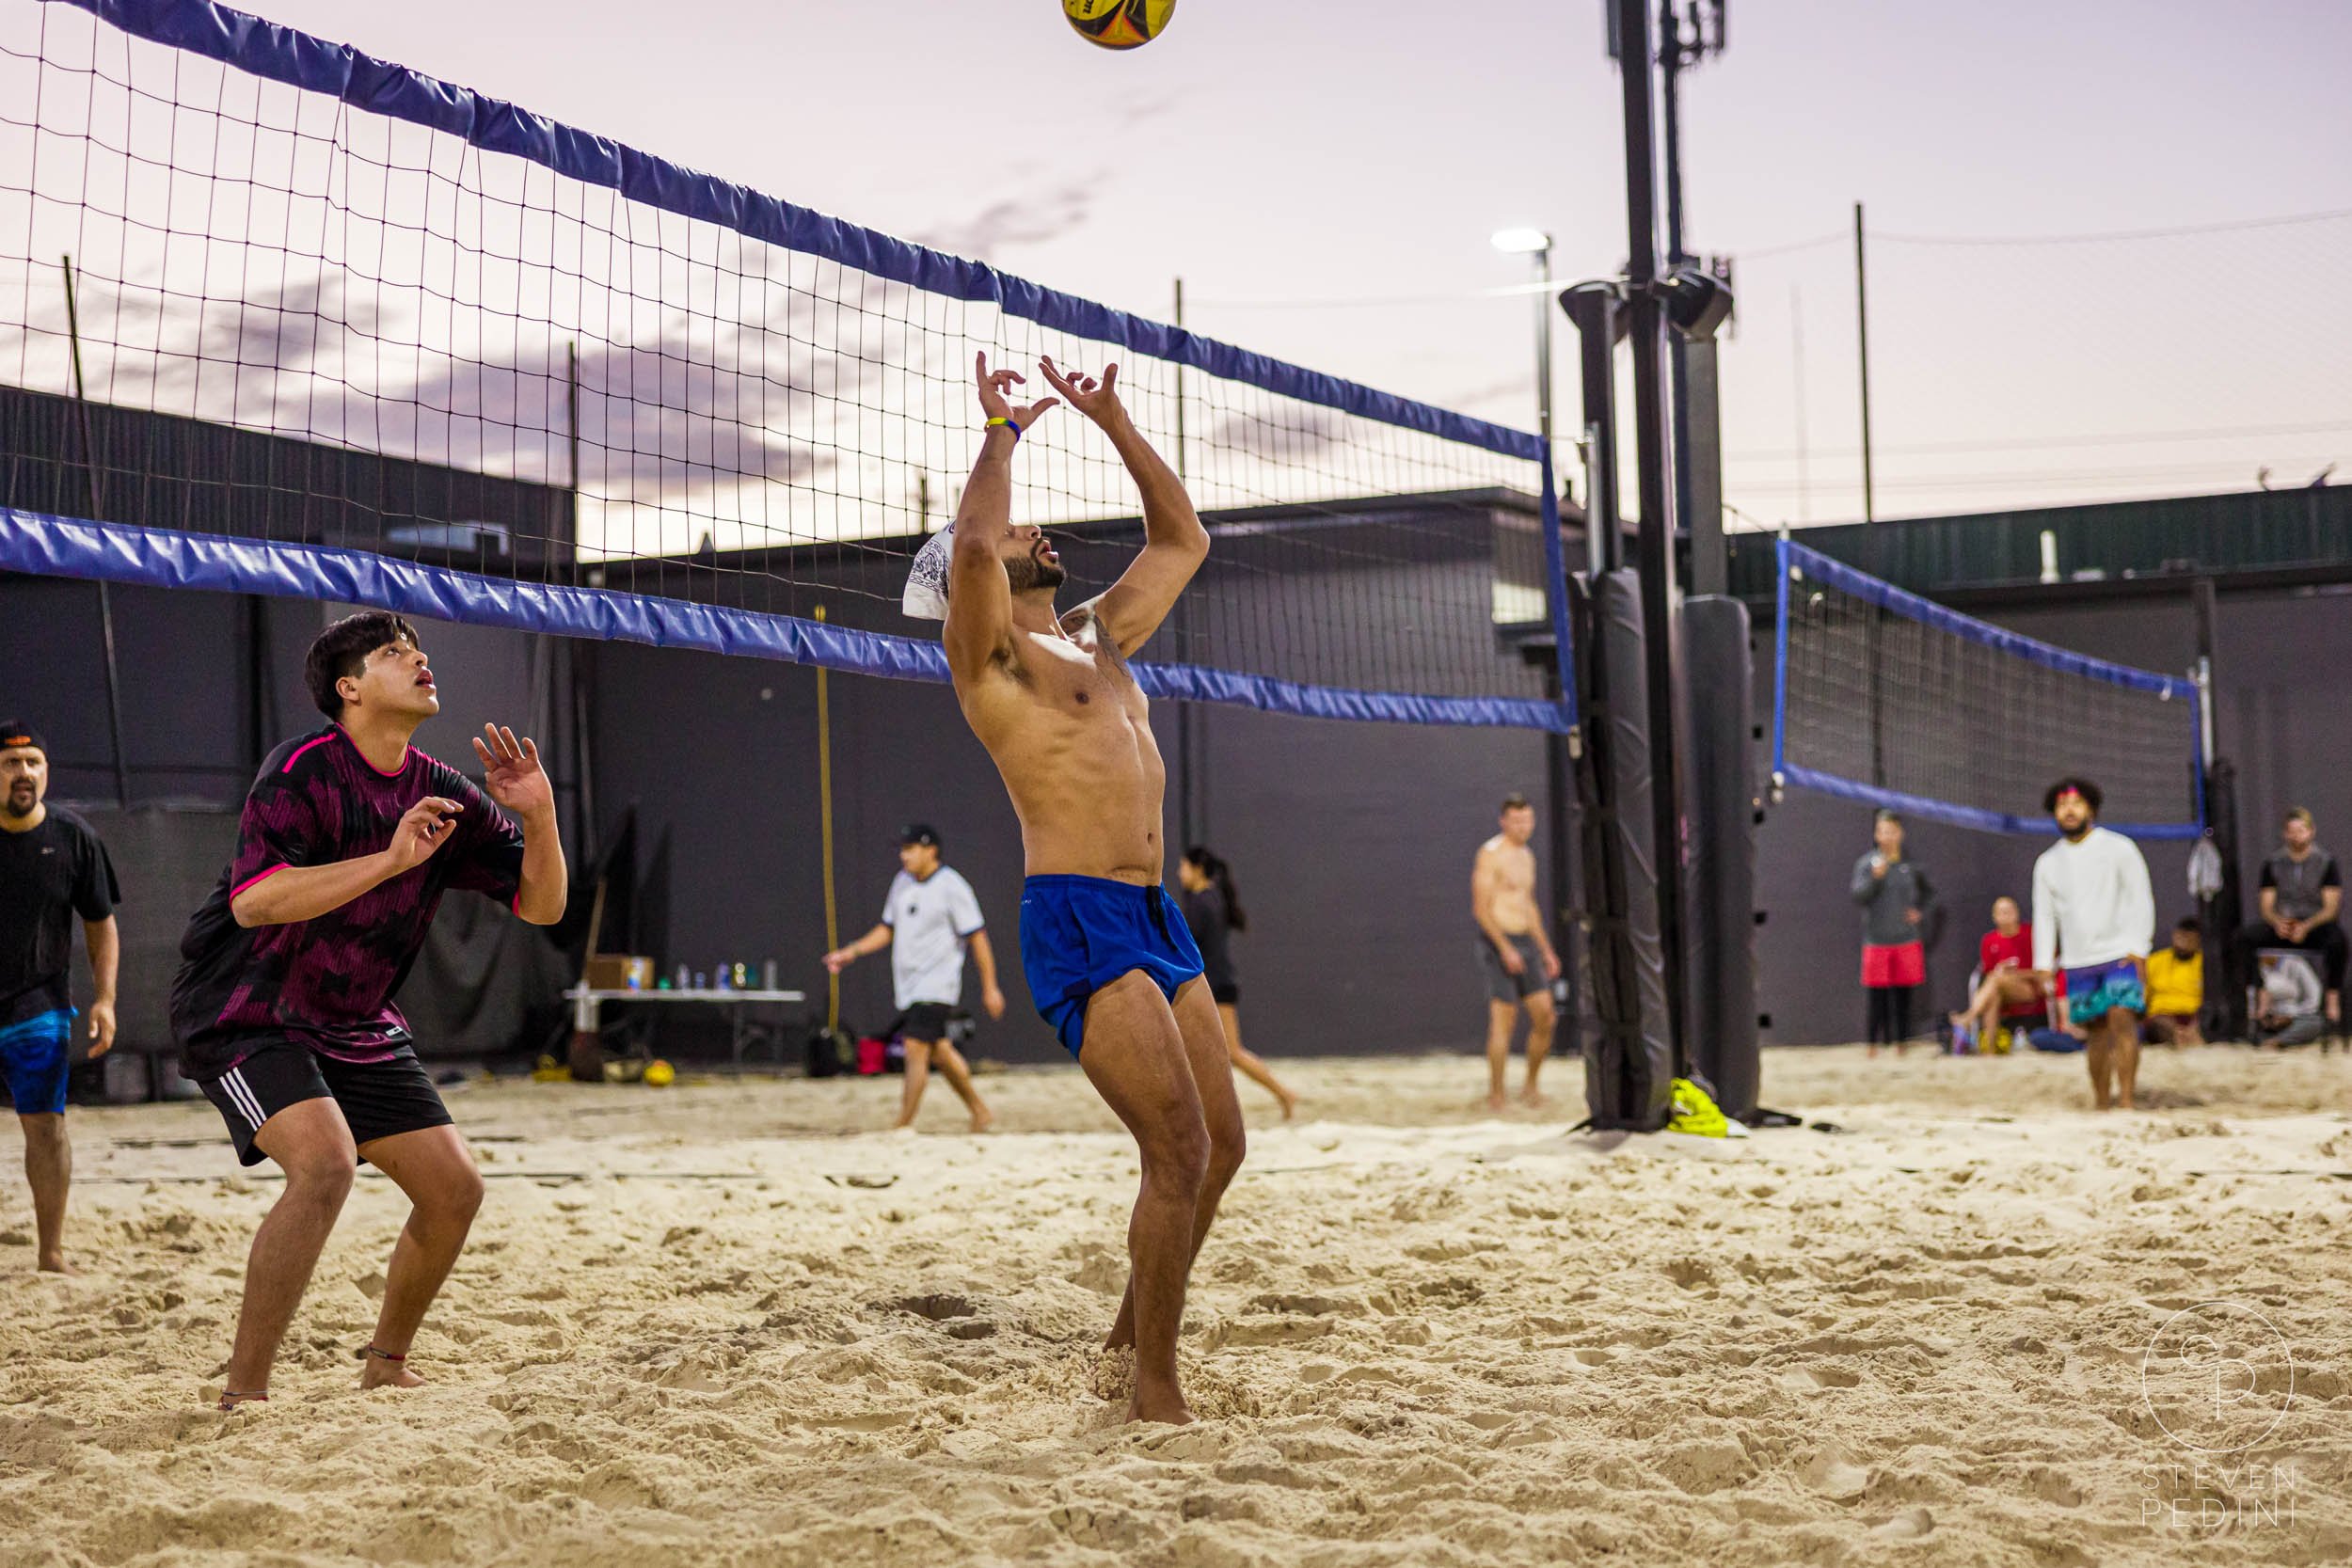 Steven Pedini Photography - Bumpy Pickle - Sand Volleyball - Houston TX - World Cup of Volleyball - 00300.jpg